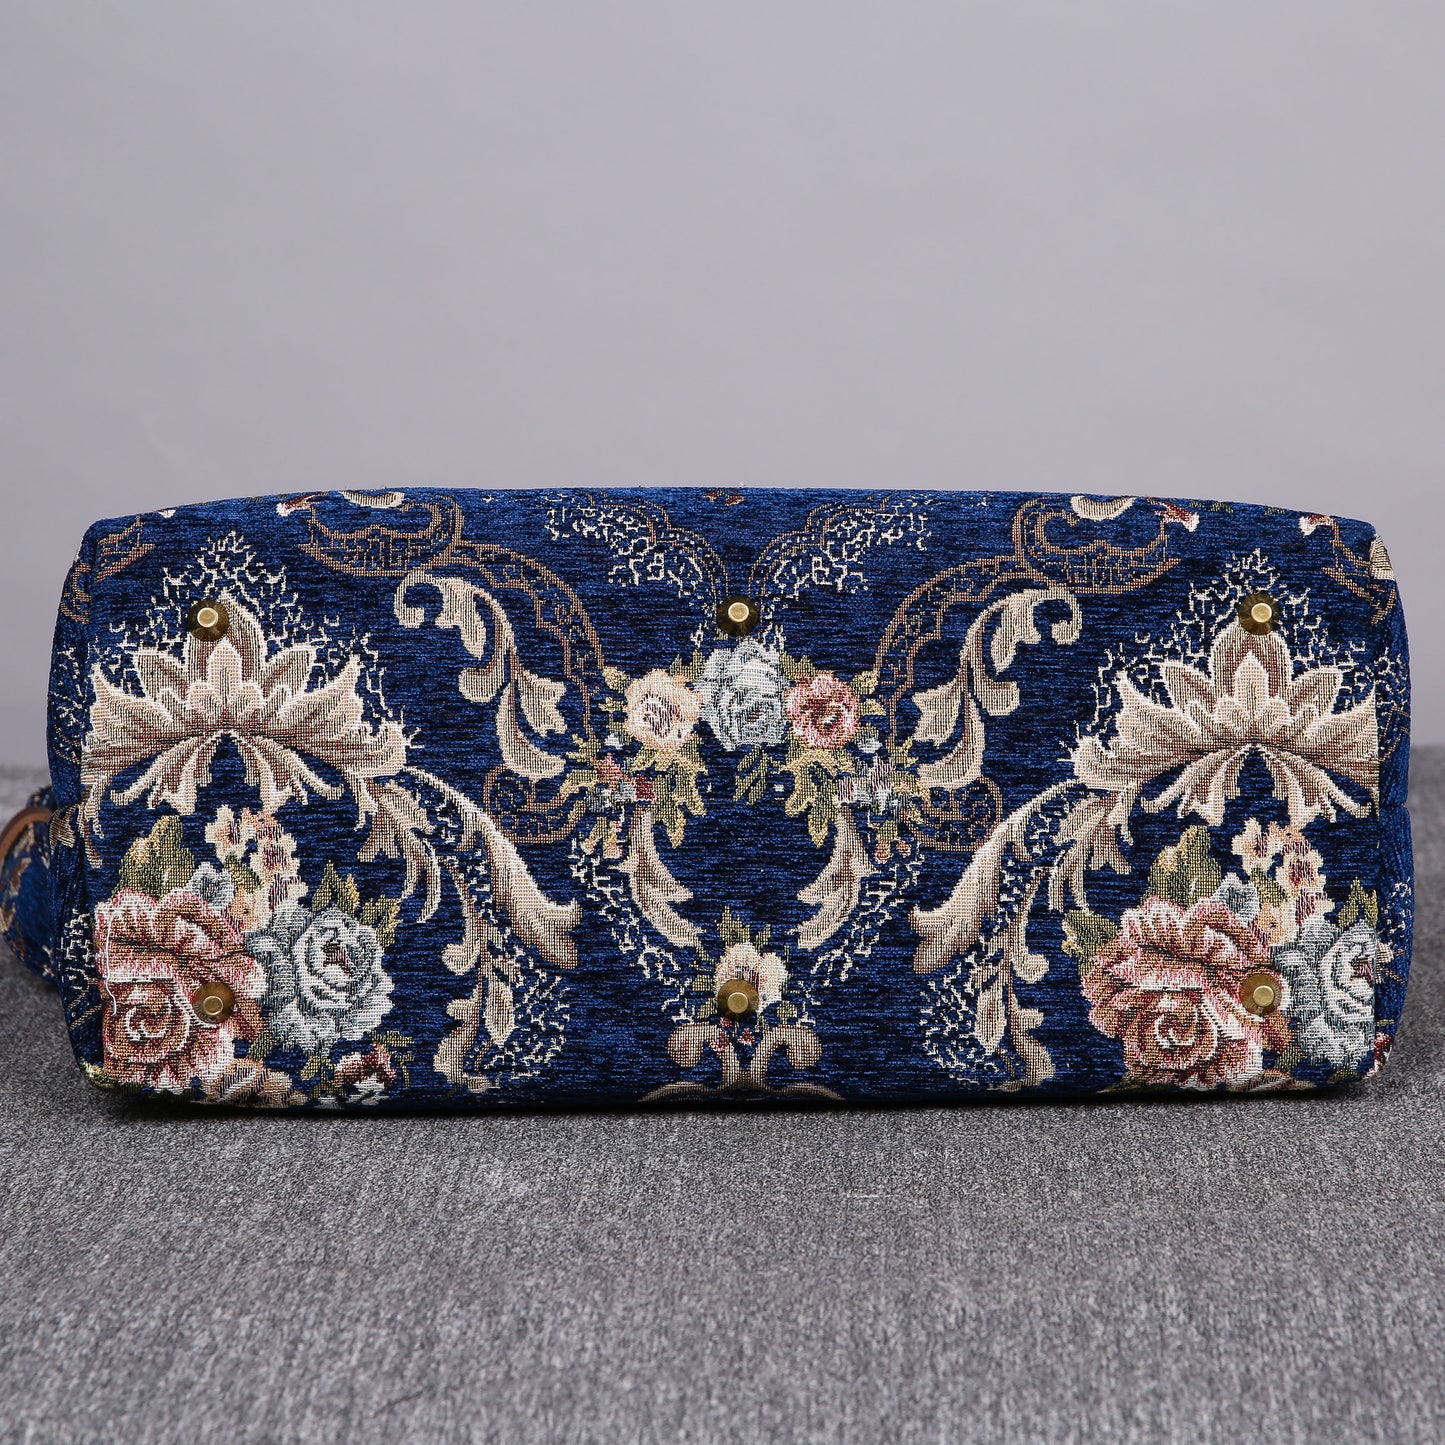 Mary Poppins Carpet Bag Floral Blue